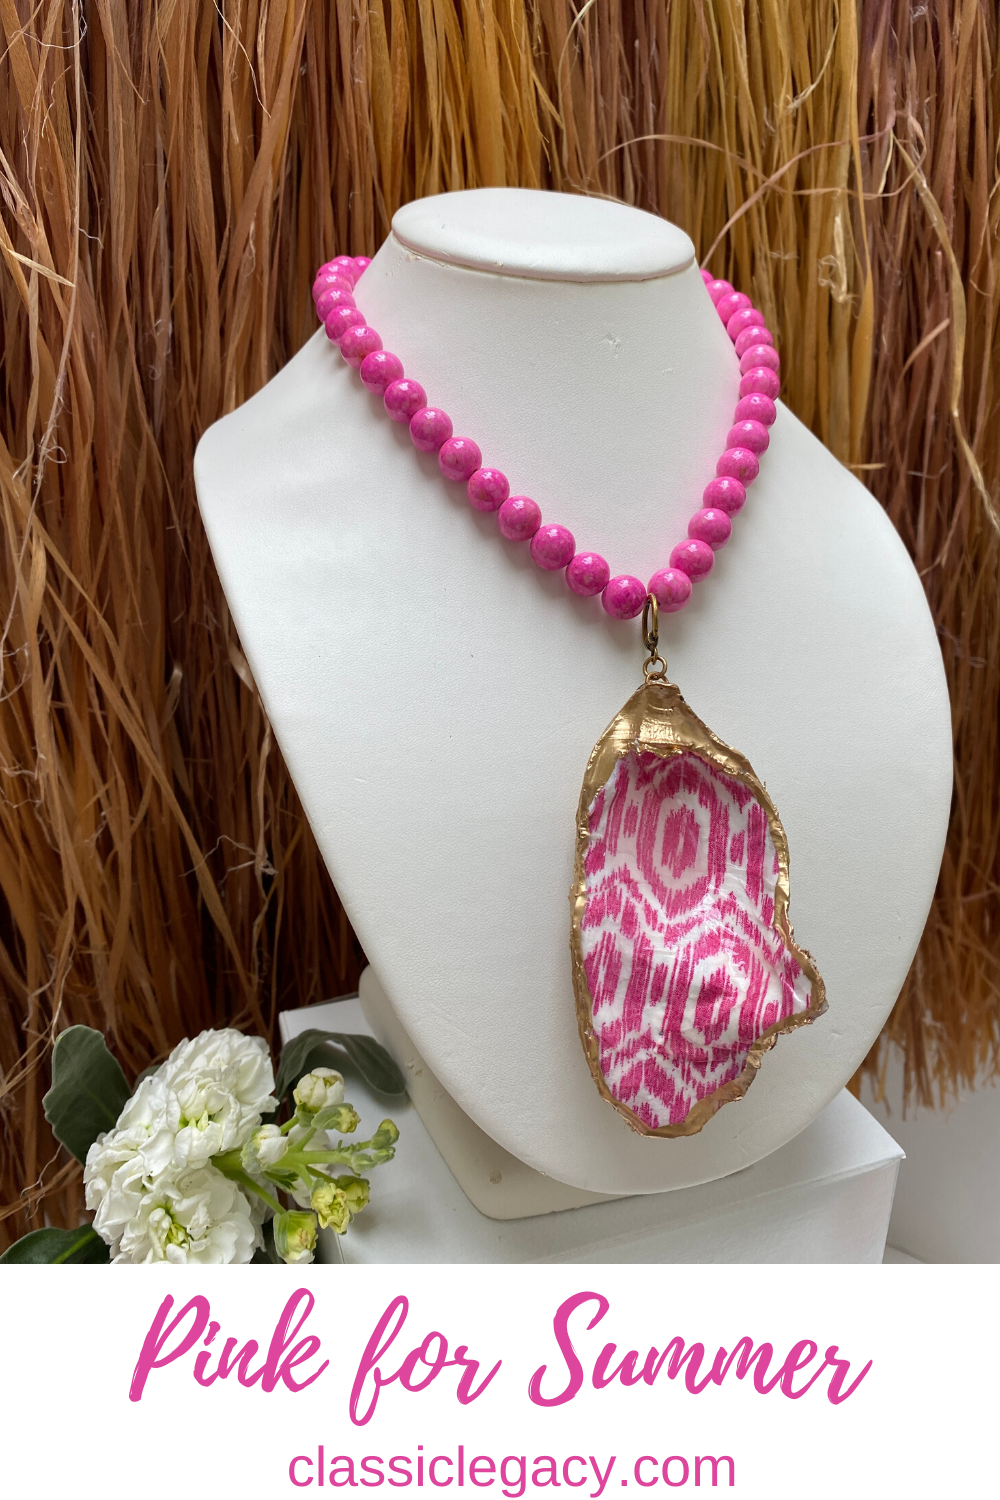 Shell Necklace, Pink beads